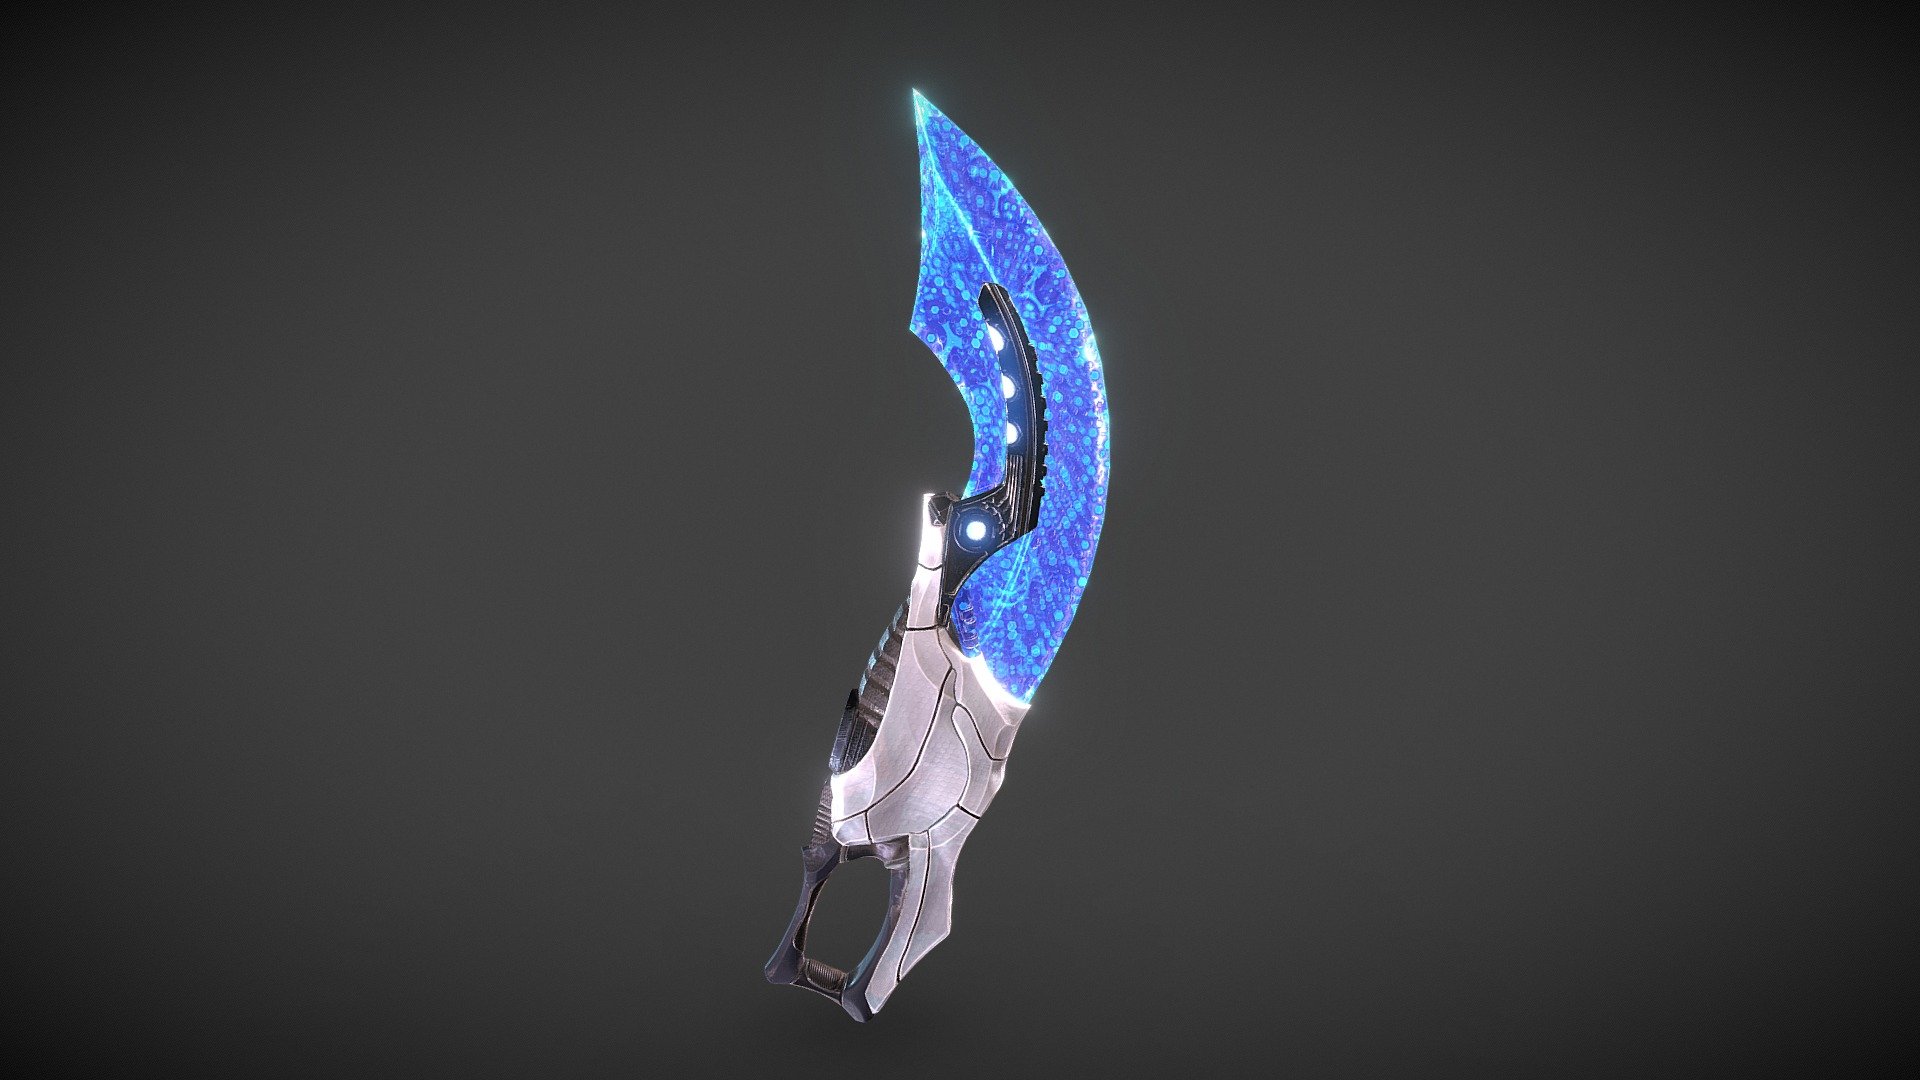 Final part of the SciFi weapon series I’m working on. This Greatsword has the same specifications as the other weapons in the set and can be used in games or other realtime projects. Full PBR texture set included 3d model